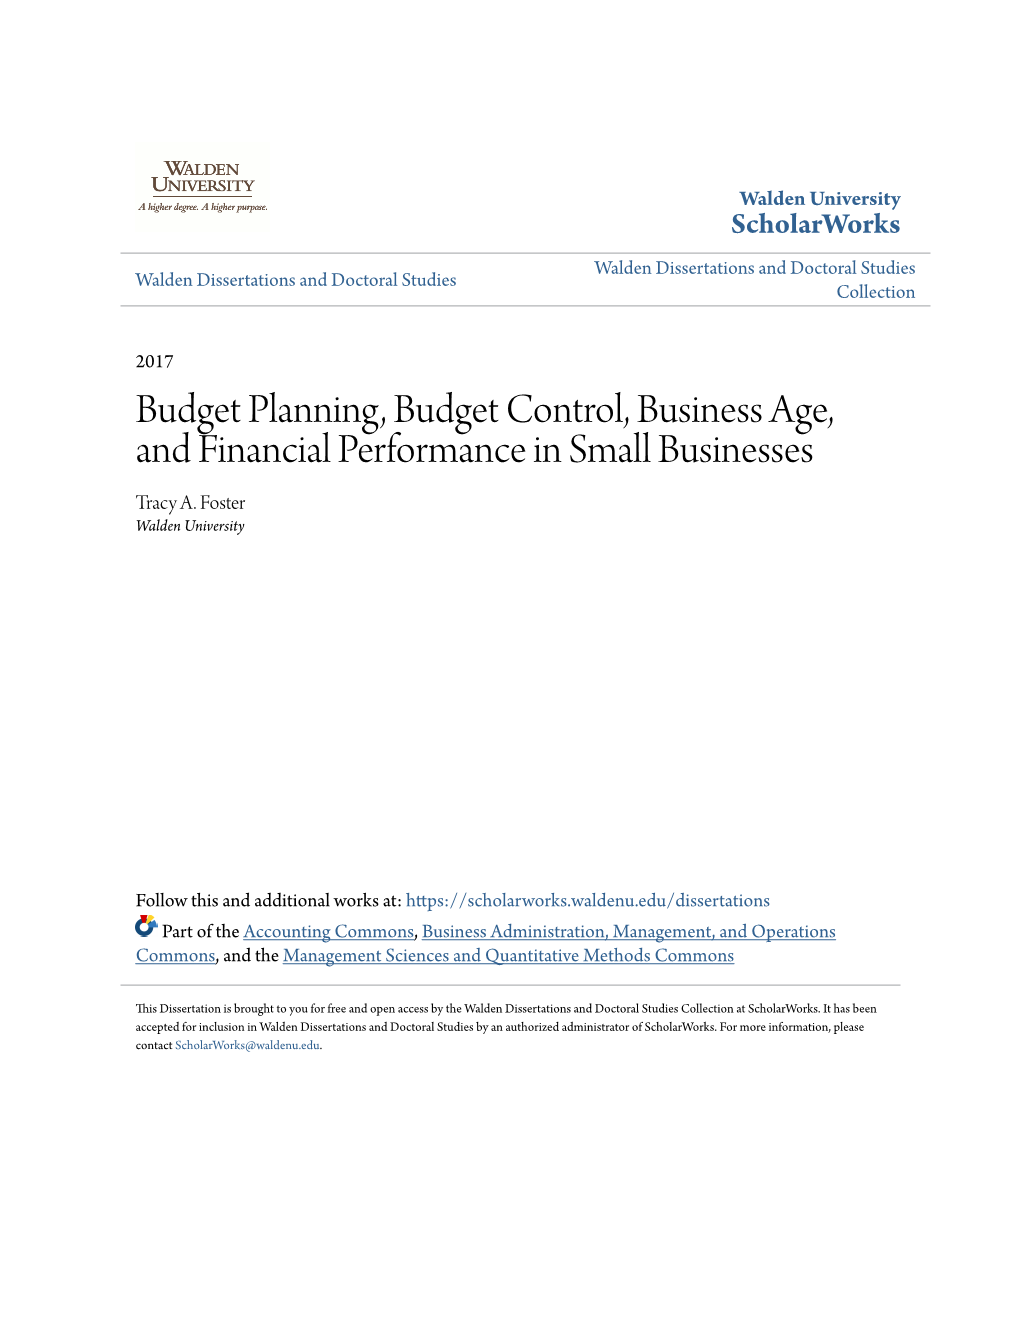 Budget Planning, Budget Control, Business Age, and Financial Performance in Small Businesses Tracy A